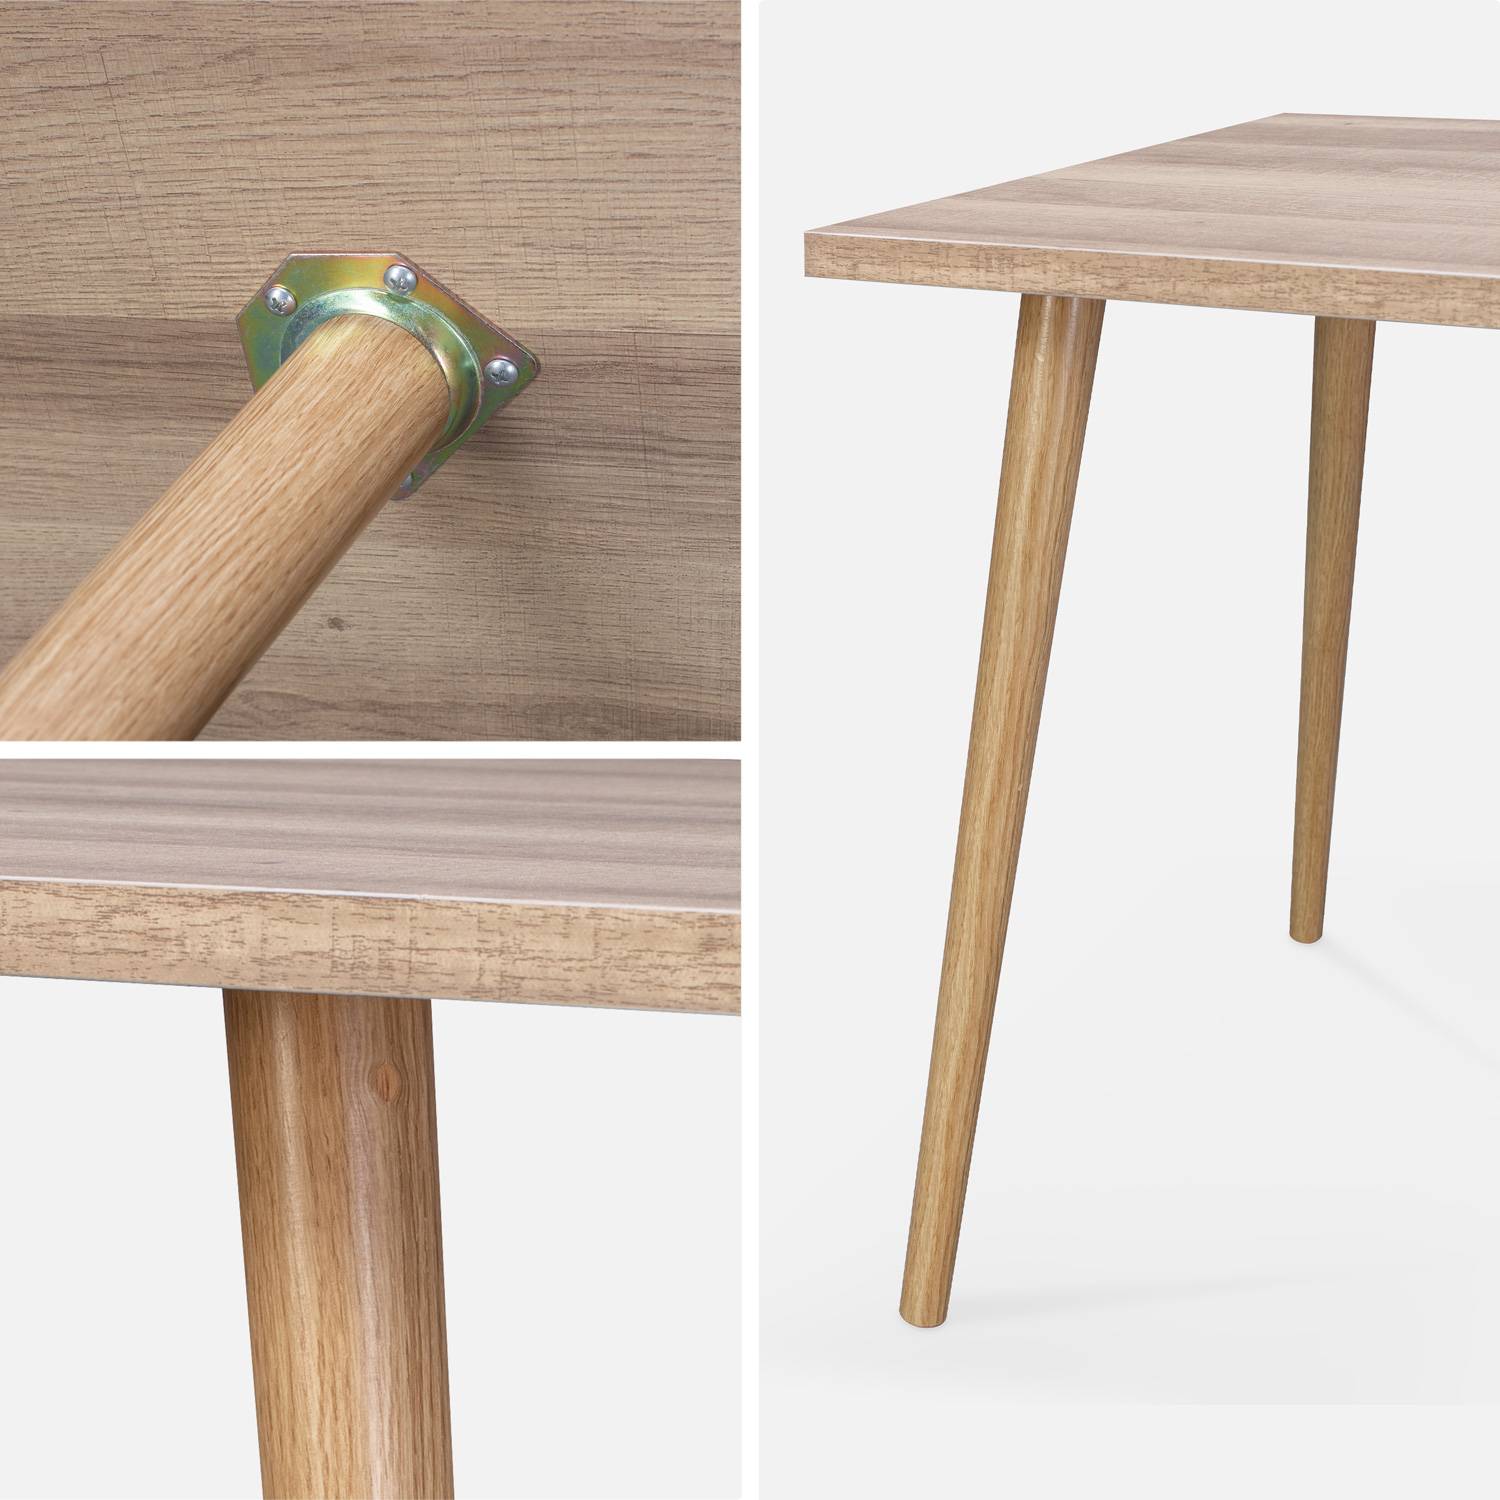 Pair of Scandi-style side tables, 110x59x45.5, 45x45x42.5cm, Scandi, Natural wood colour Photo6